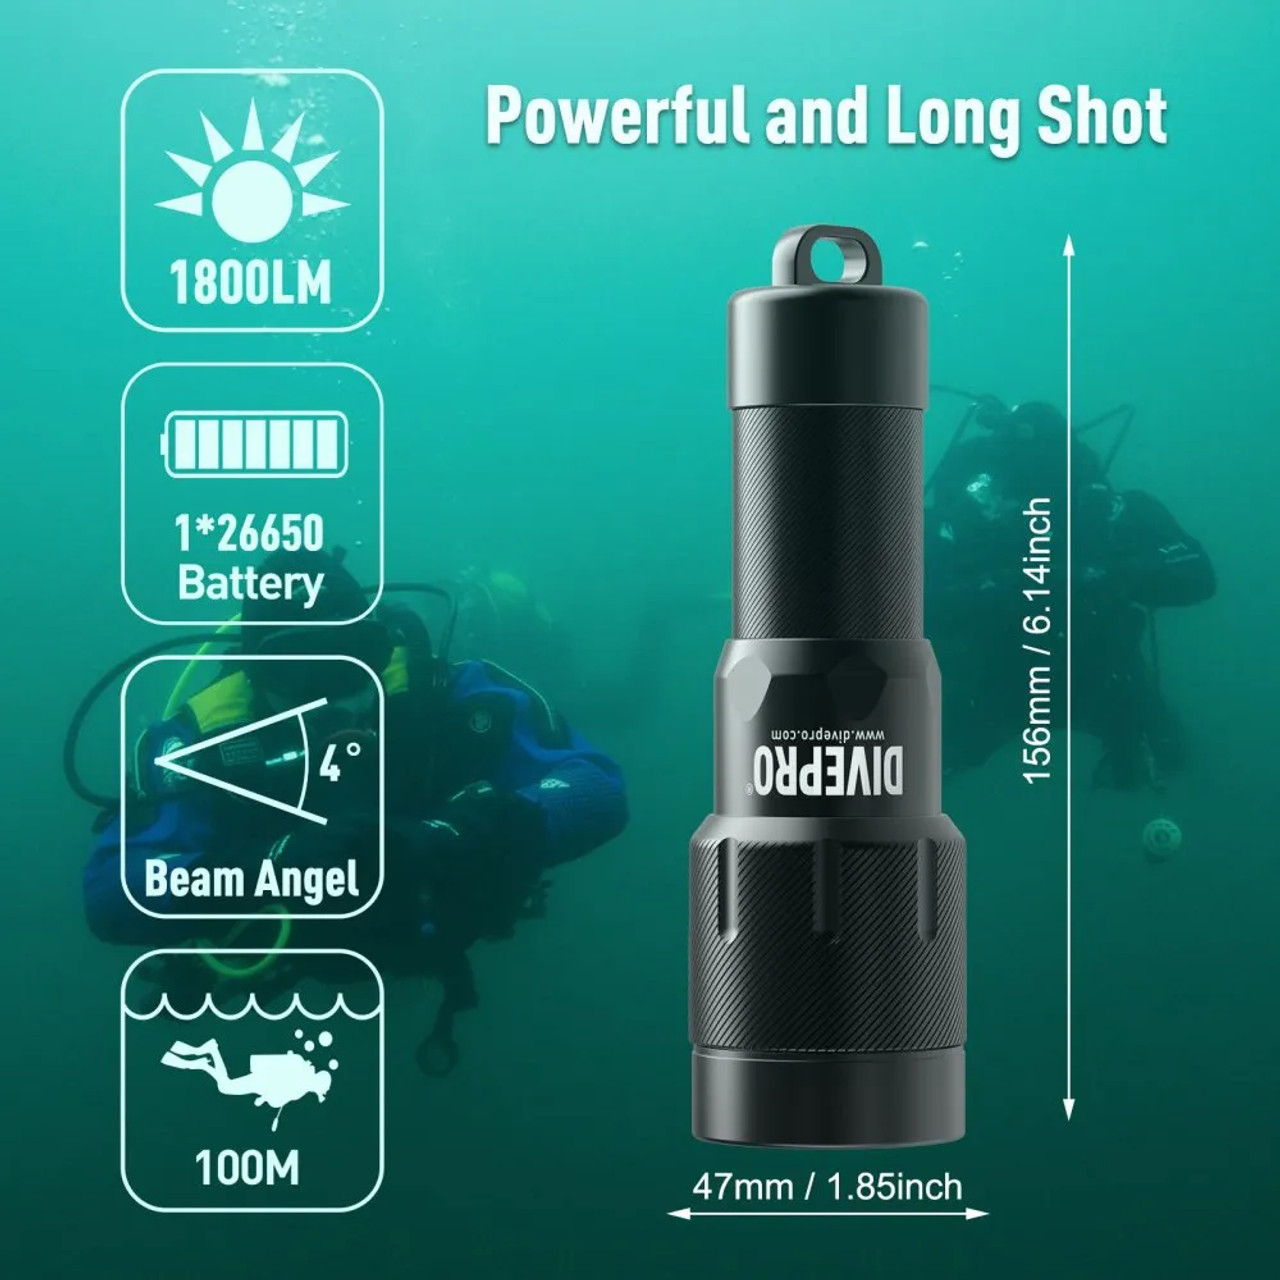 DivePro D18 -"Powerful and Long Shot" (1800LM)